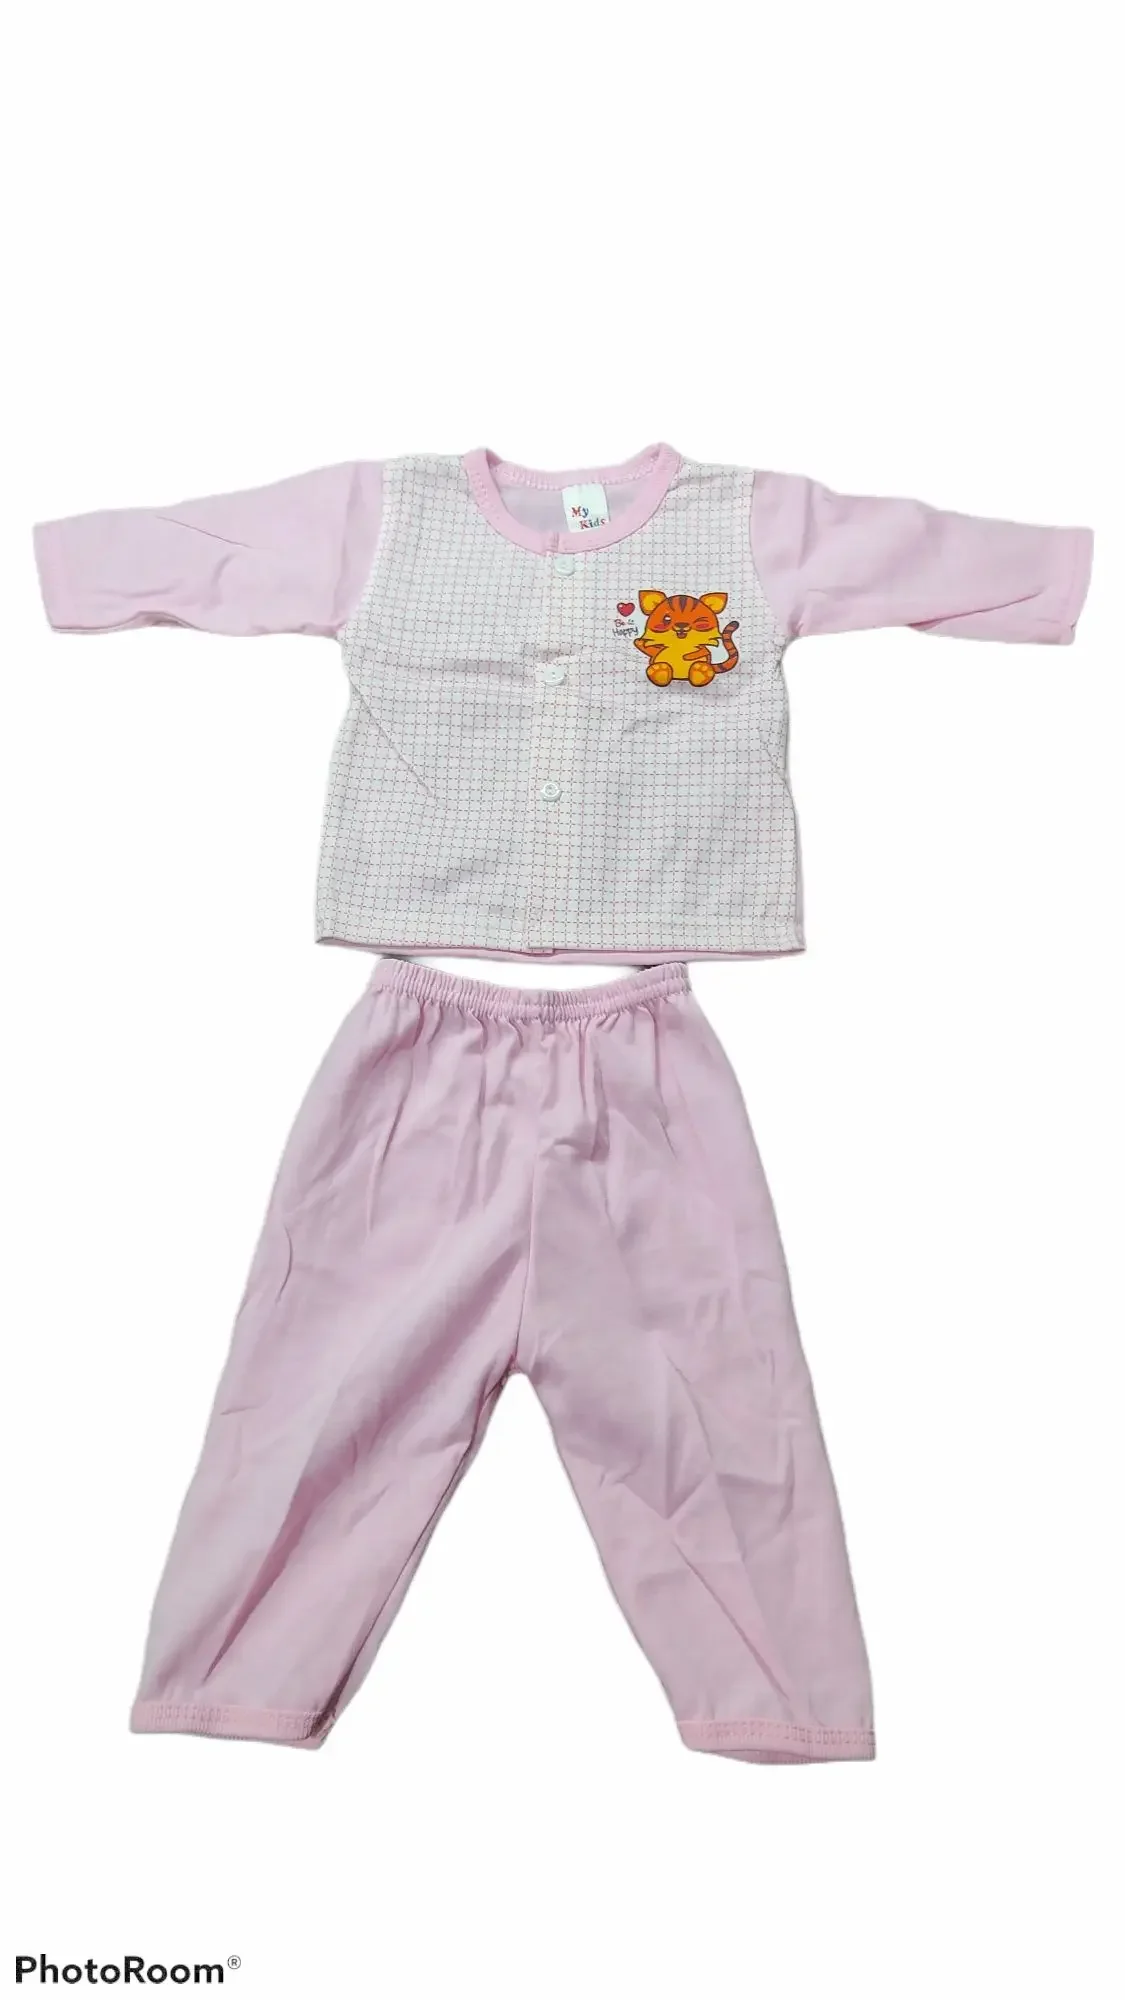 NEW BORN BABY CLOTHES SET NEW BORN 0 MONTH - 6 MONTH BAJU BABY MYKIDS (1)